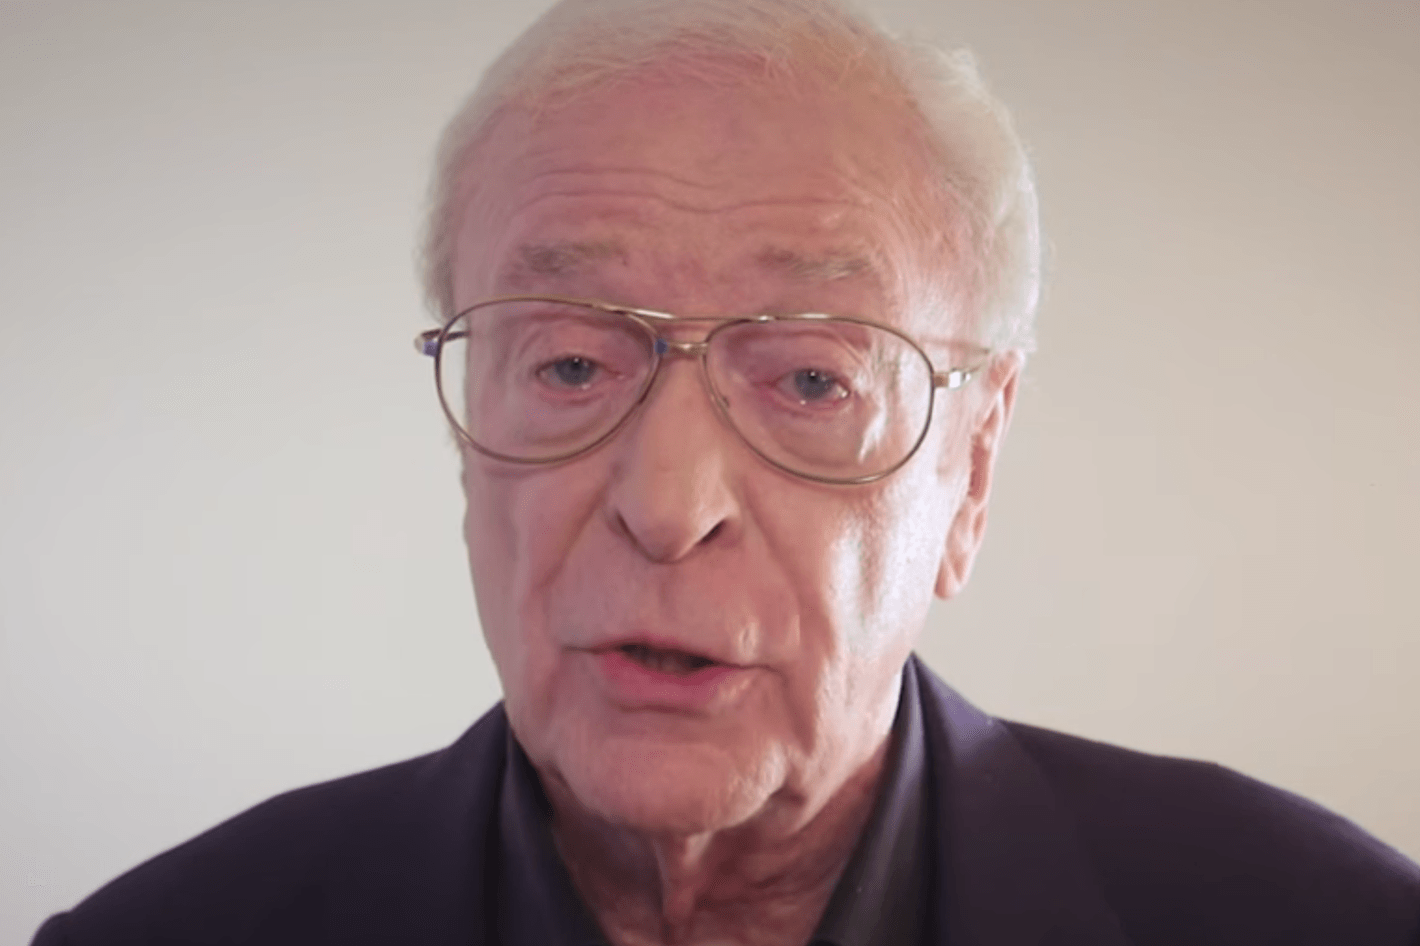 Michael Caine S Michael Caine Impression Is Only A B Michael